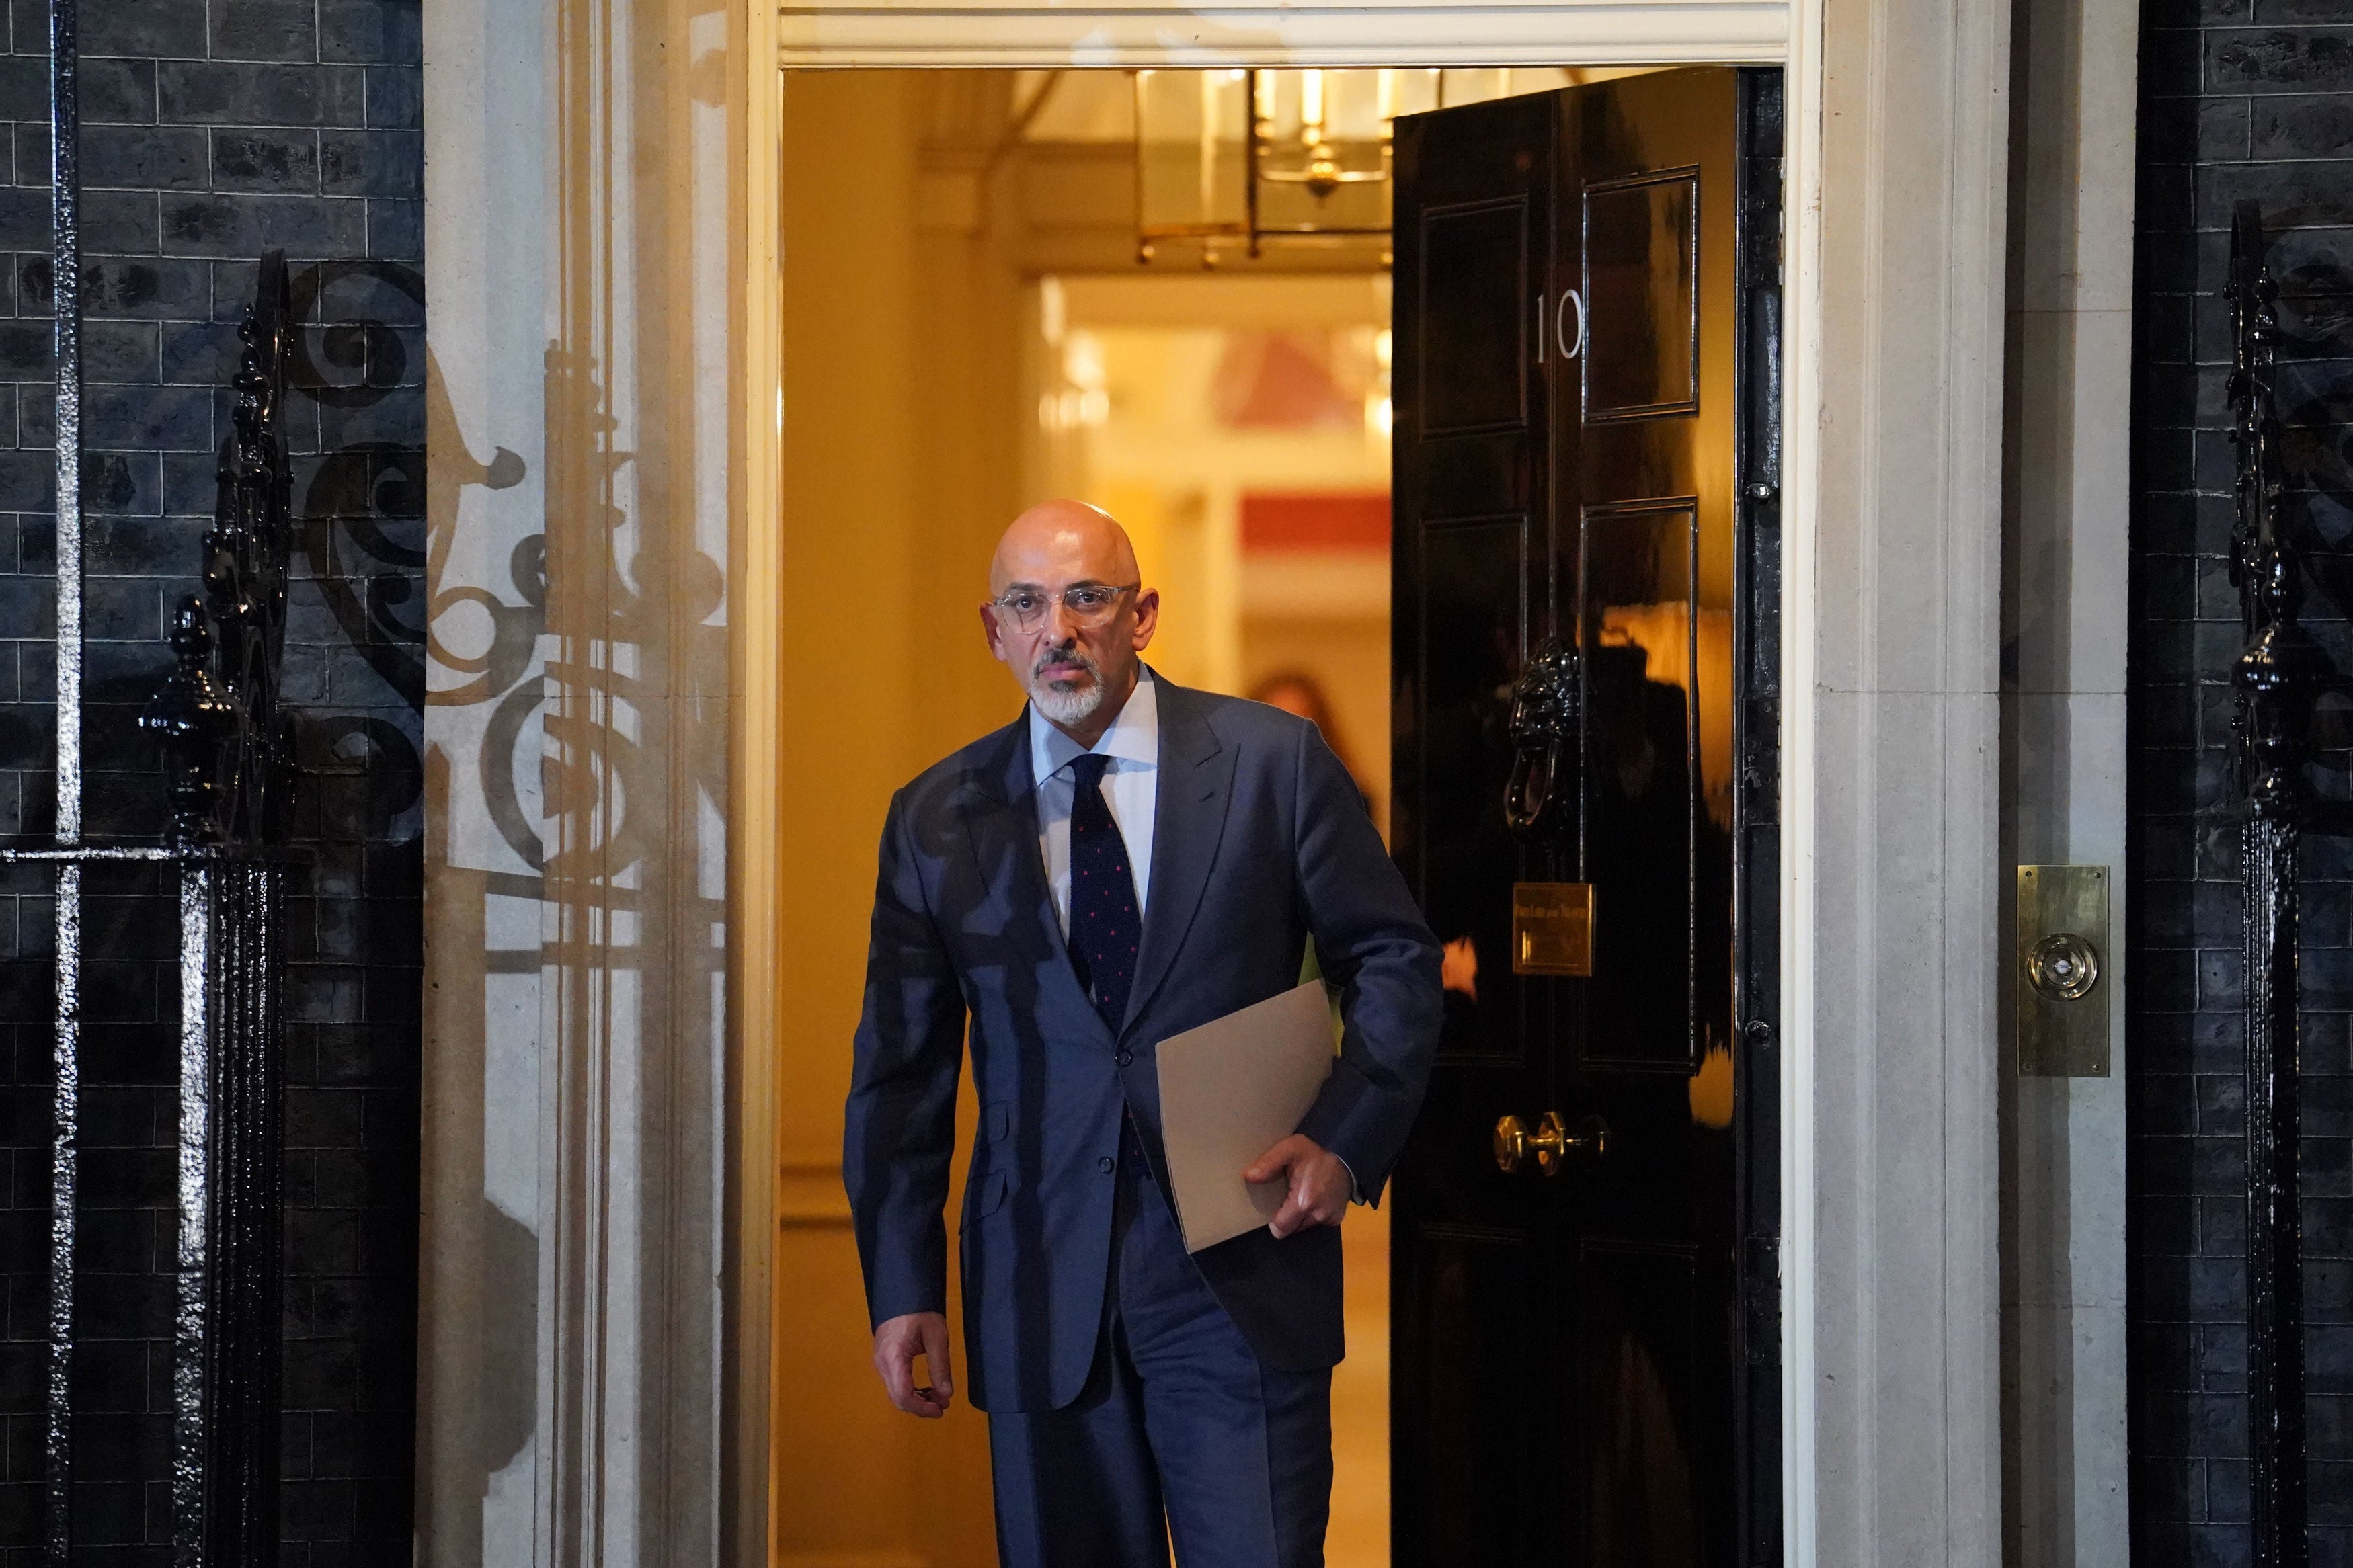 Nadhim Zahawi has left his education secretary role to become chancellor